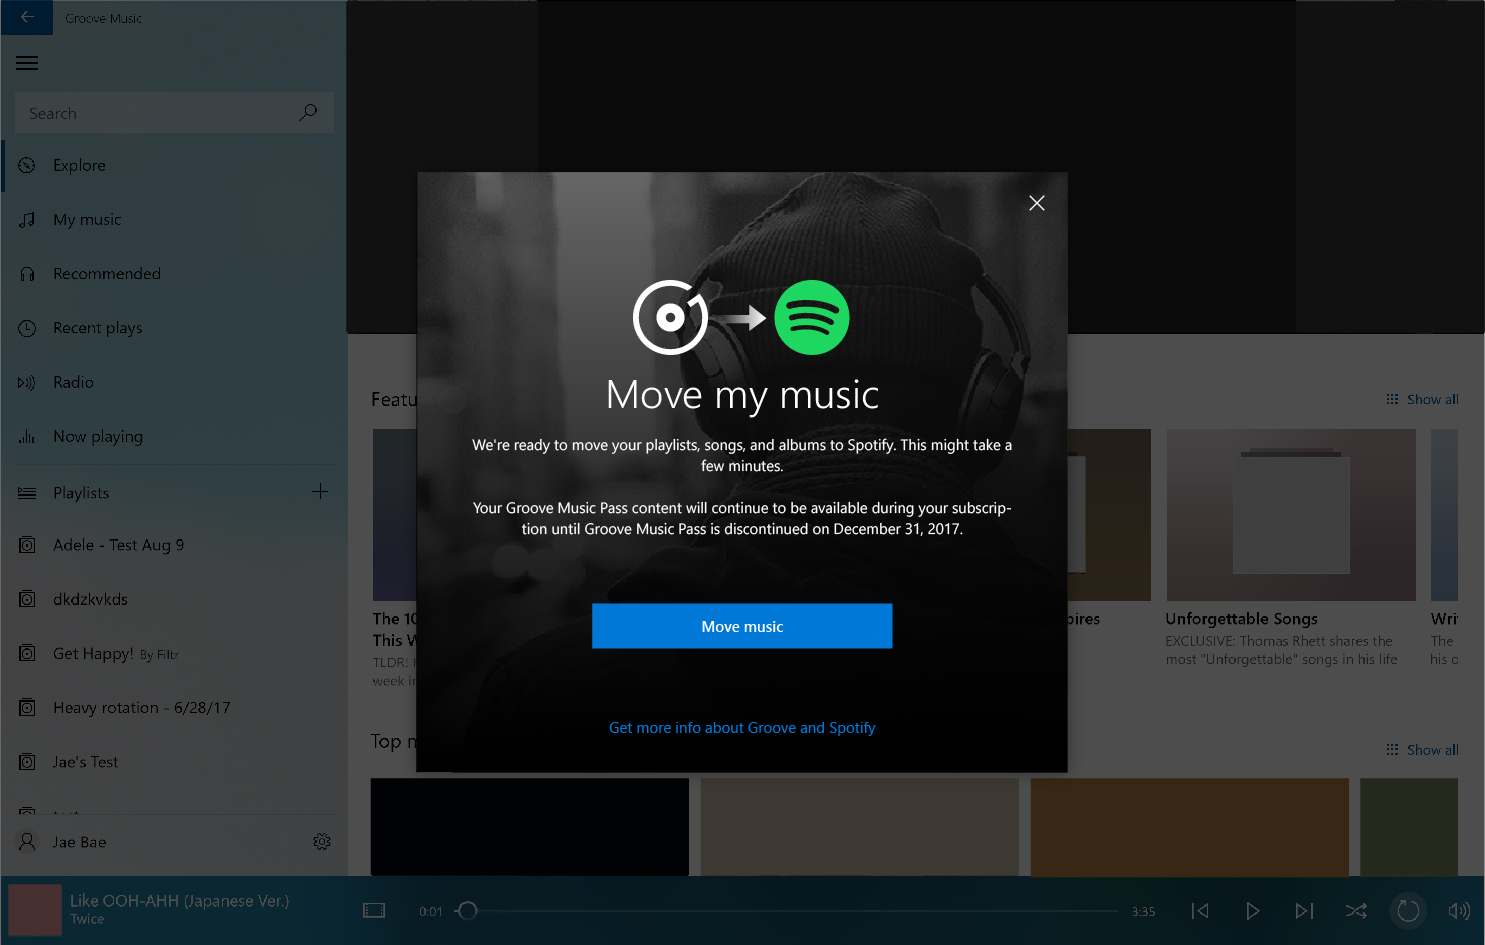 Cortana Suddenly Tries to Access Groove Music Instead of Spotify 8e2a039485d9789f8aabf55a8a768205.jpg